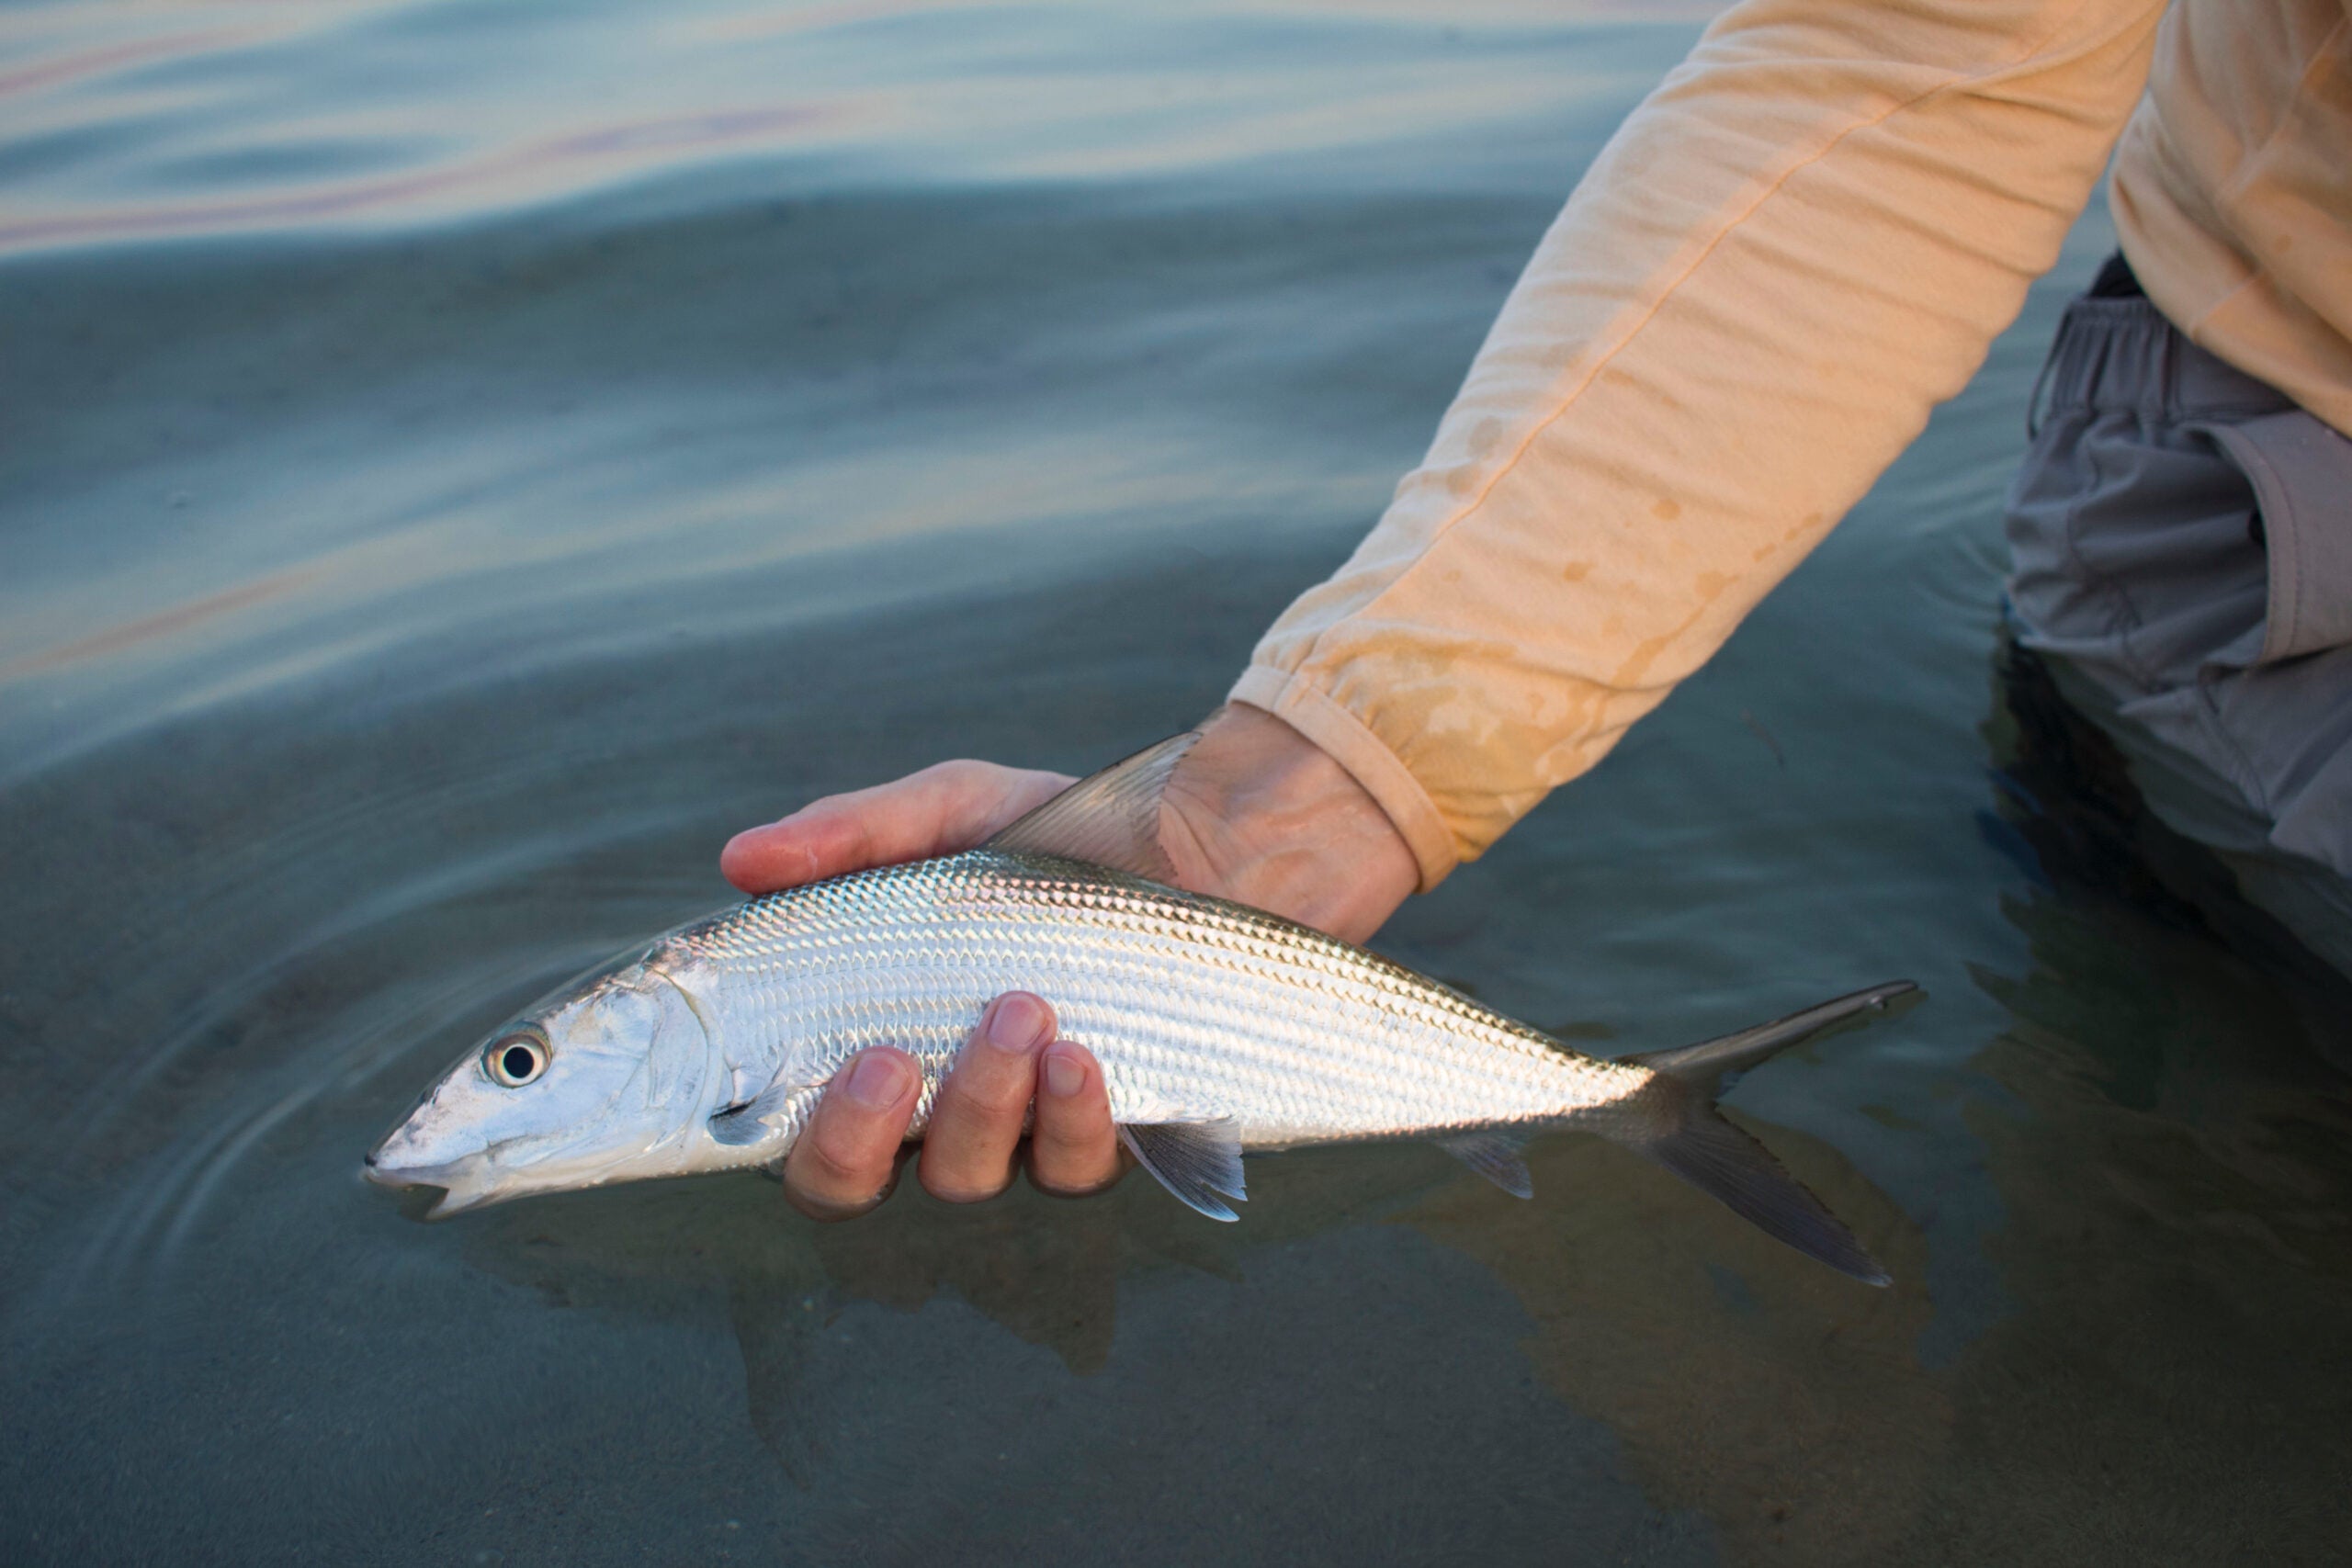 Saltwater wading boots are helpful when chasing species like bonefish on clearwater flats.